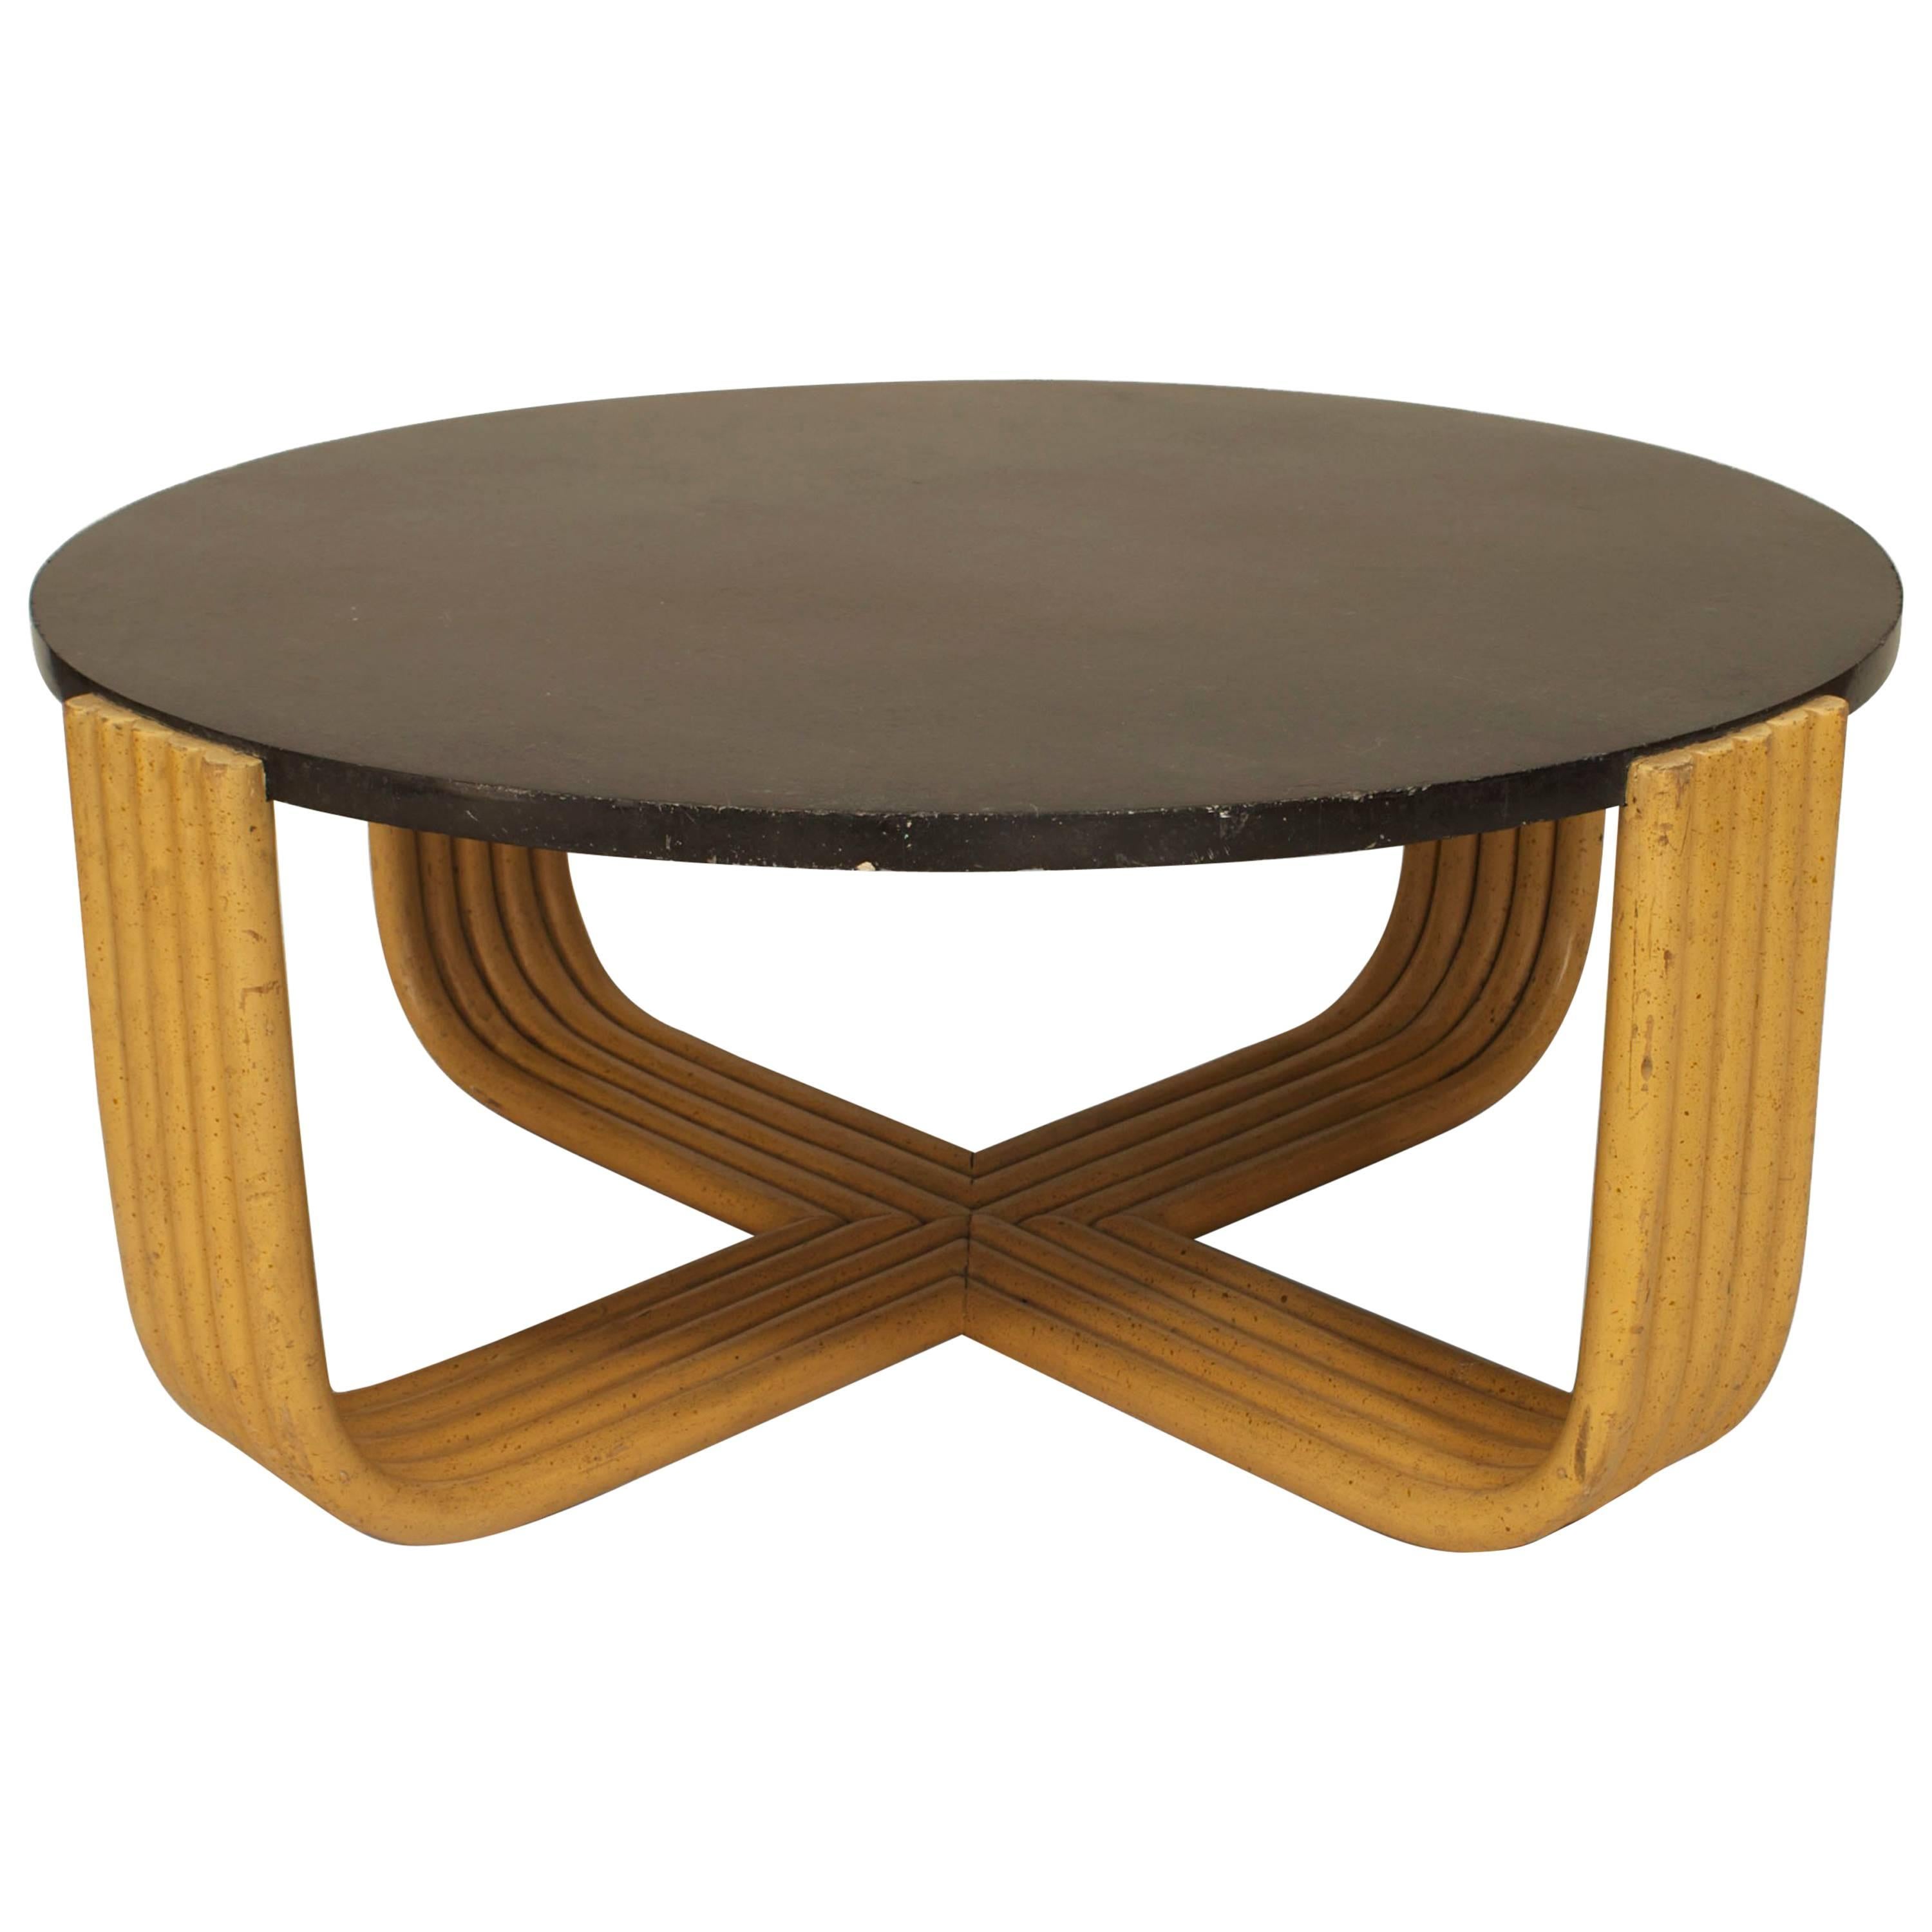 Paul Frankl American Art Moderne Bakelite and Faux Bamboo Coffee Table For Sale